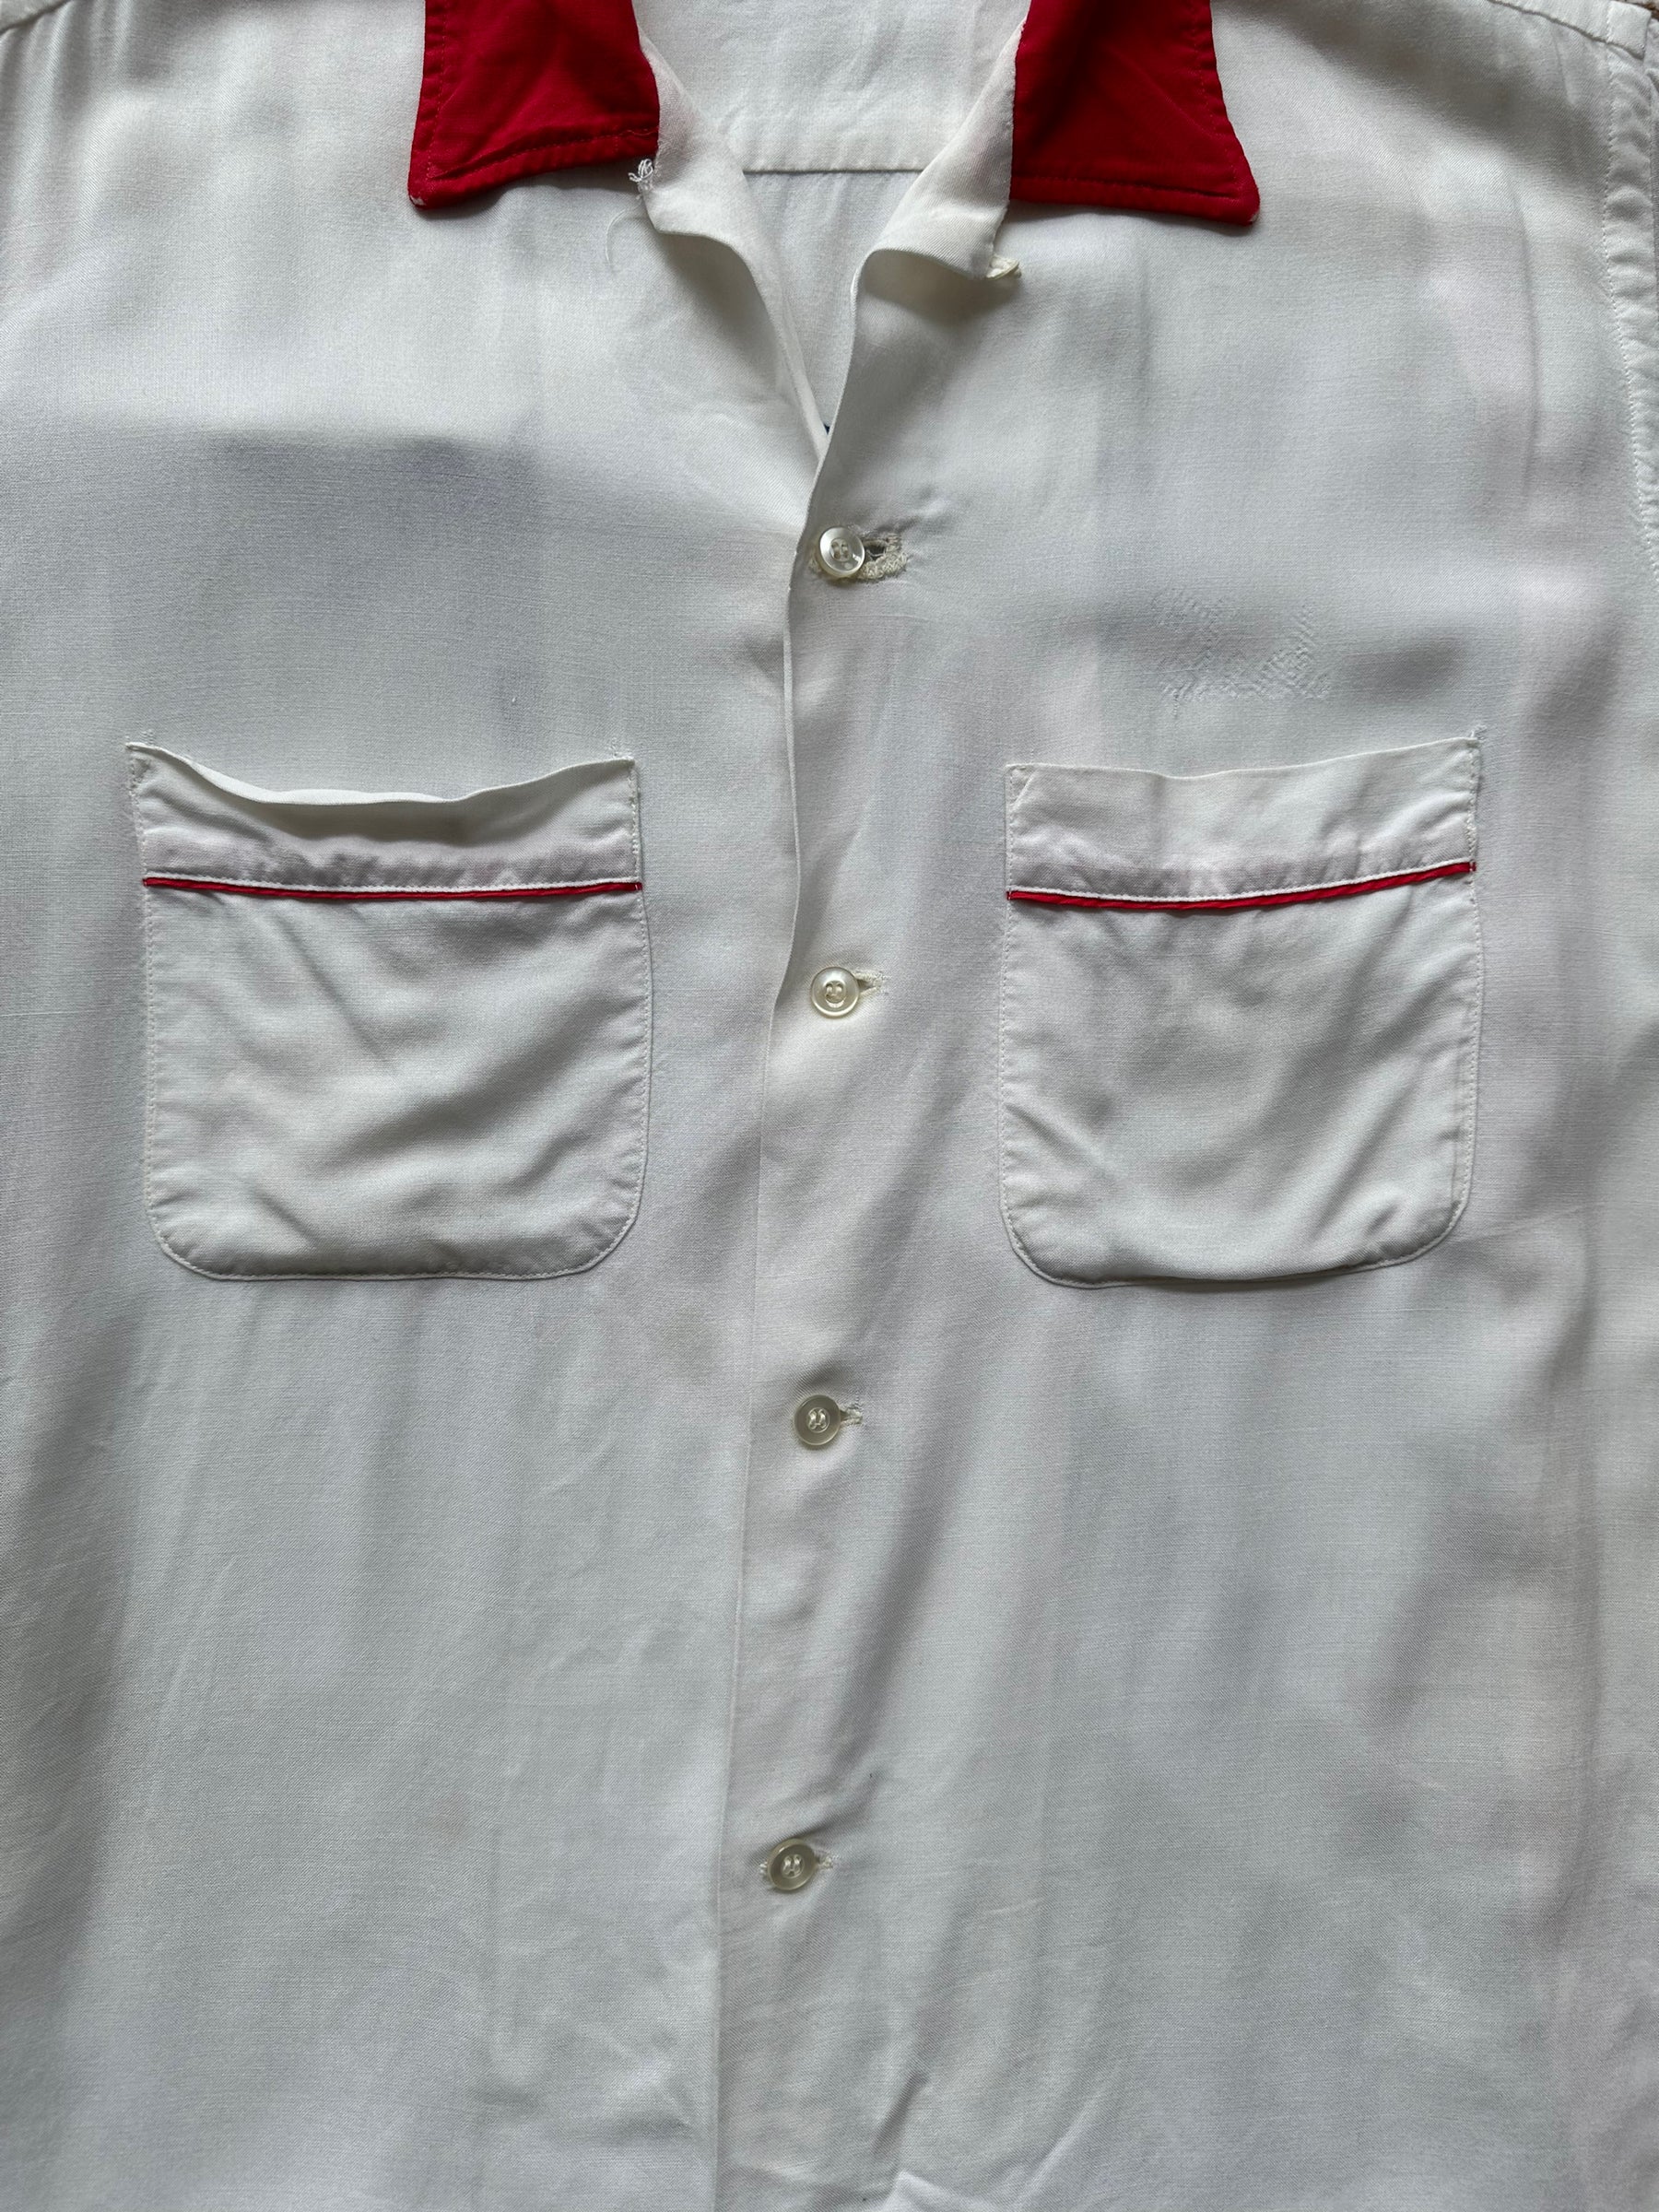 Front pockets of Vintage "Standard Oil Co." Chainstitched Bowling Shirt SZ M | Vintage Bowling Shirt Seattle | Barn Owl Vintage Seattle